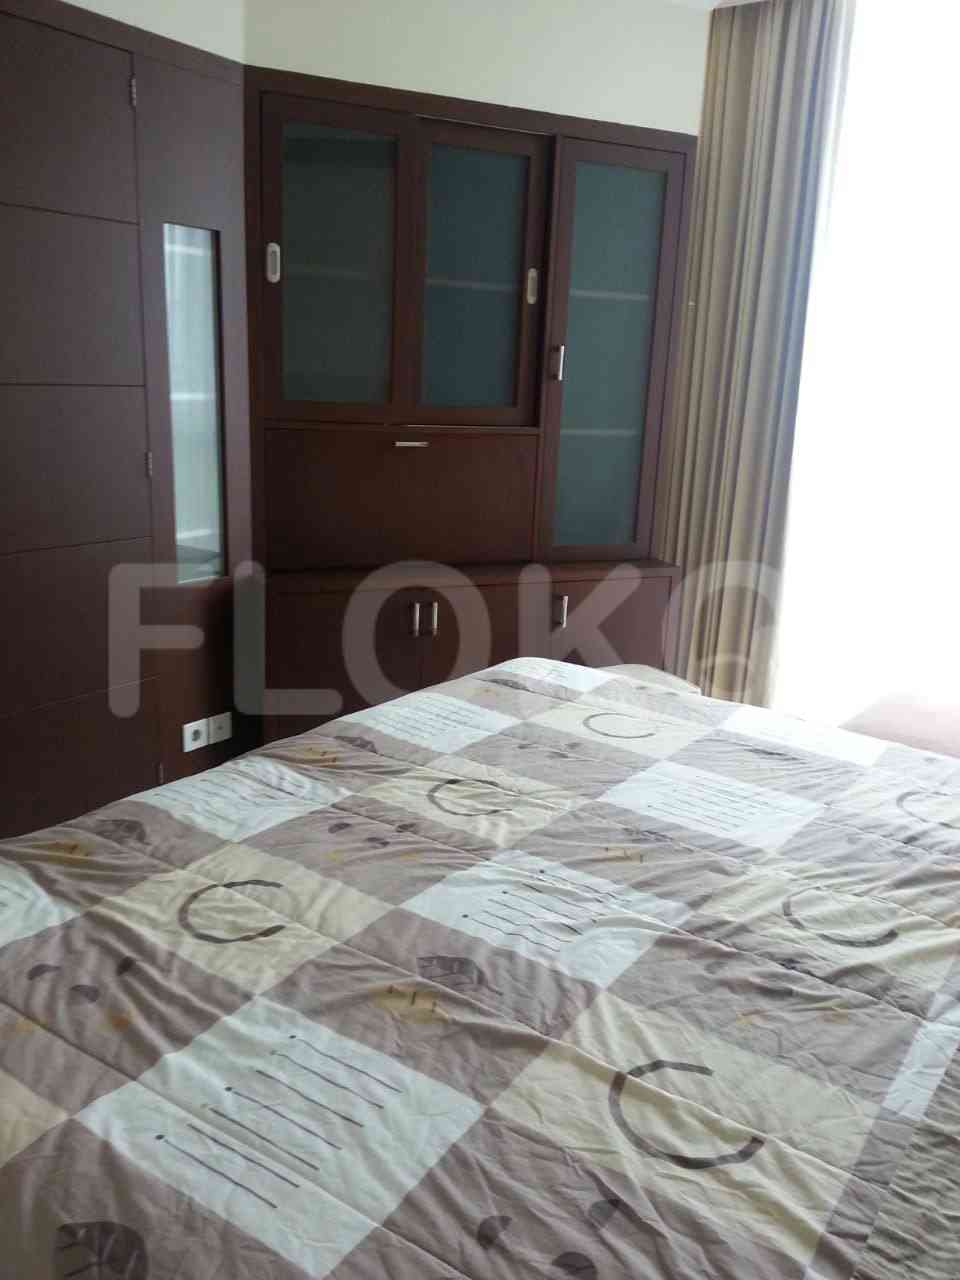 3 Bedroom on 8th Floor for Rent in Bellagio Residence - fkuffb 4